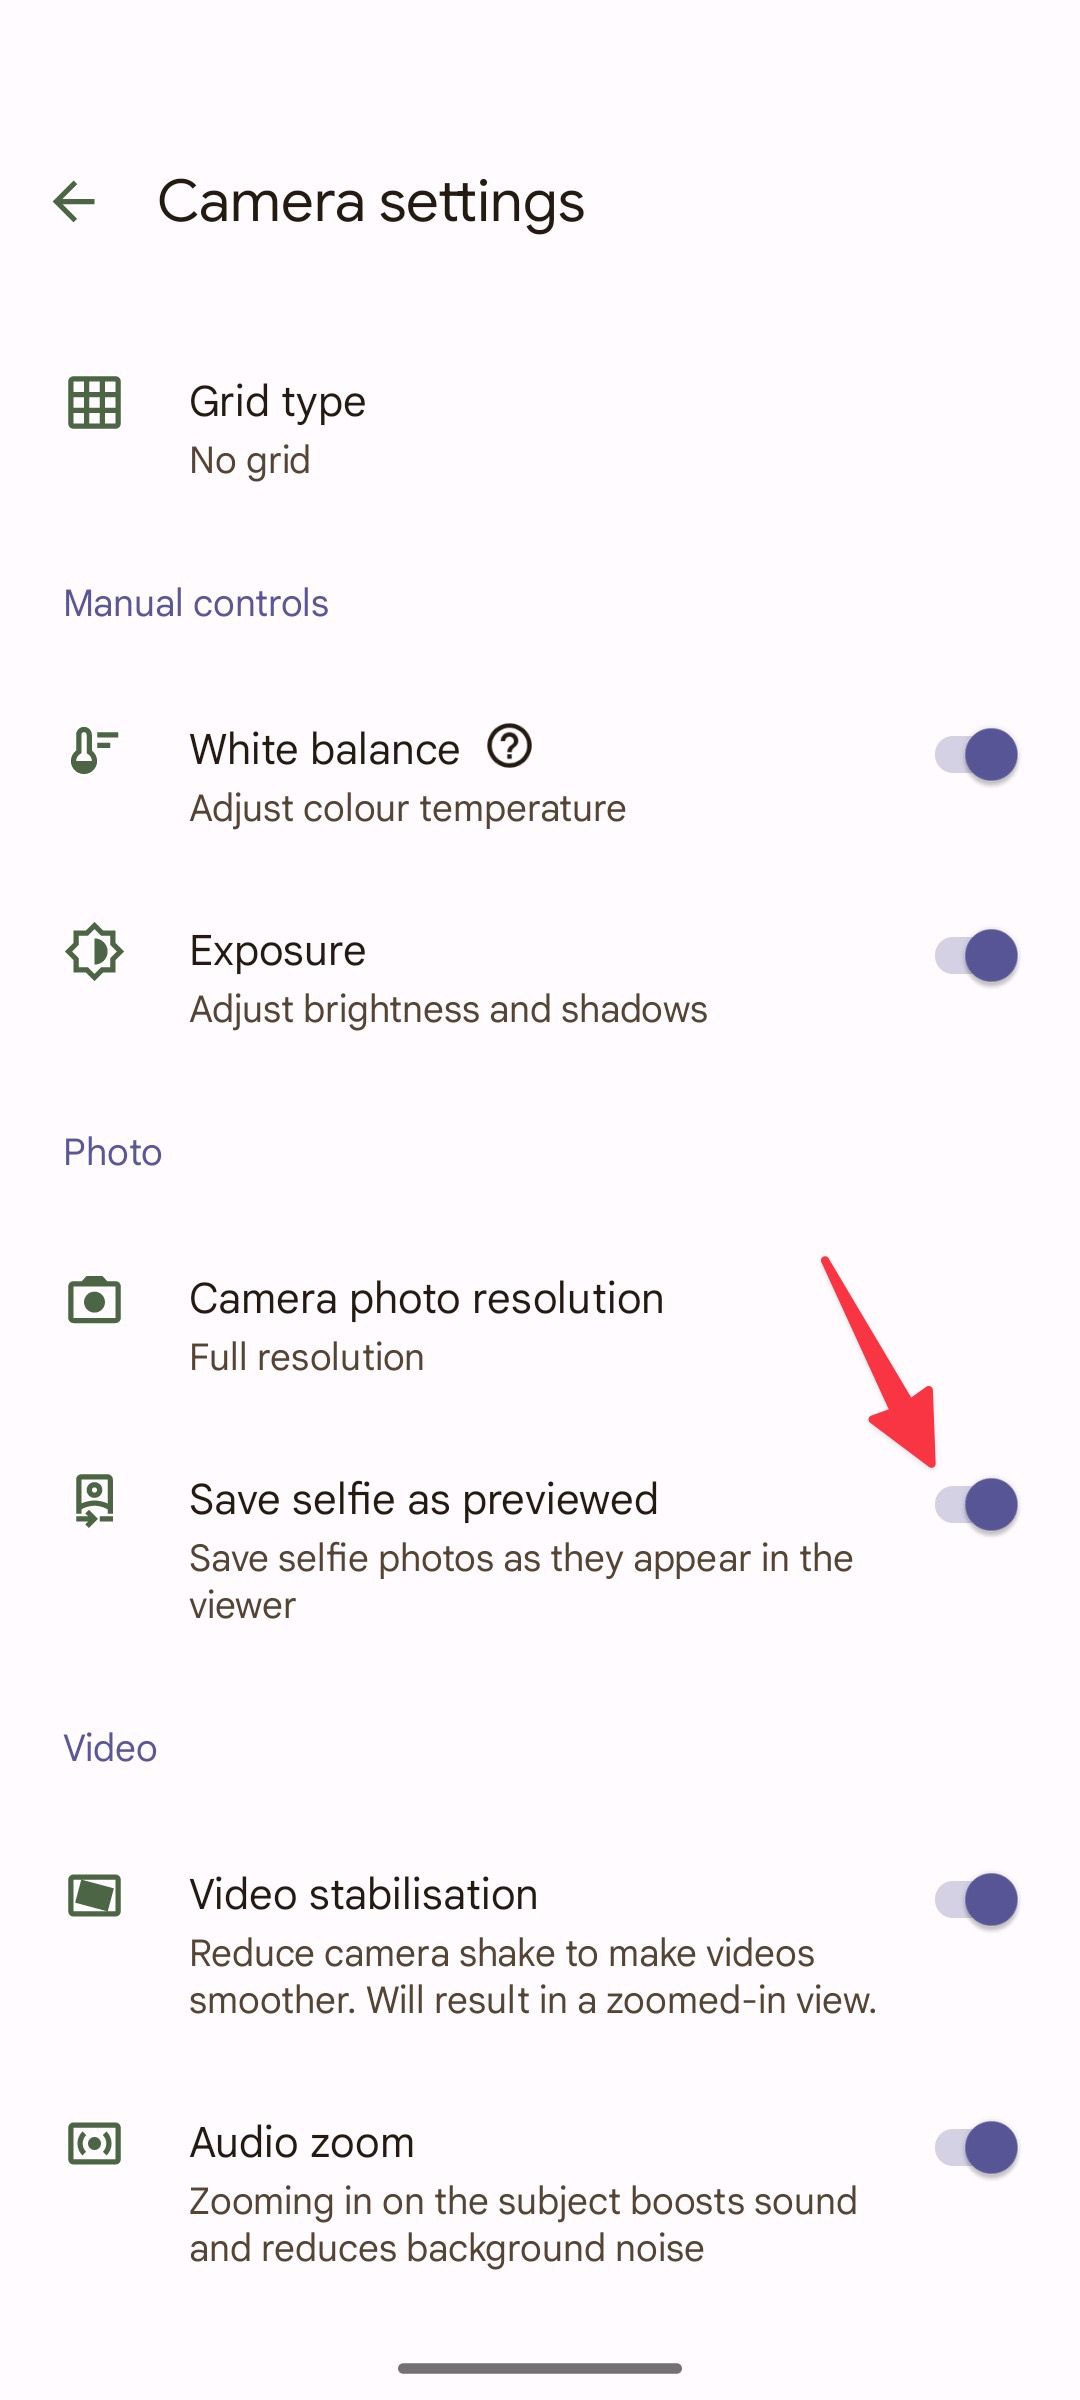 Save selfies as previewed toggle